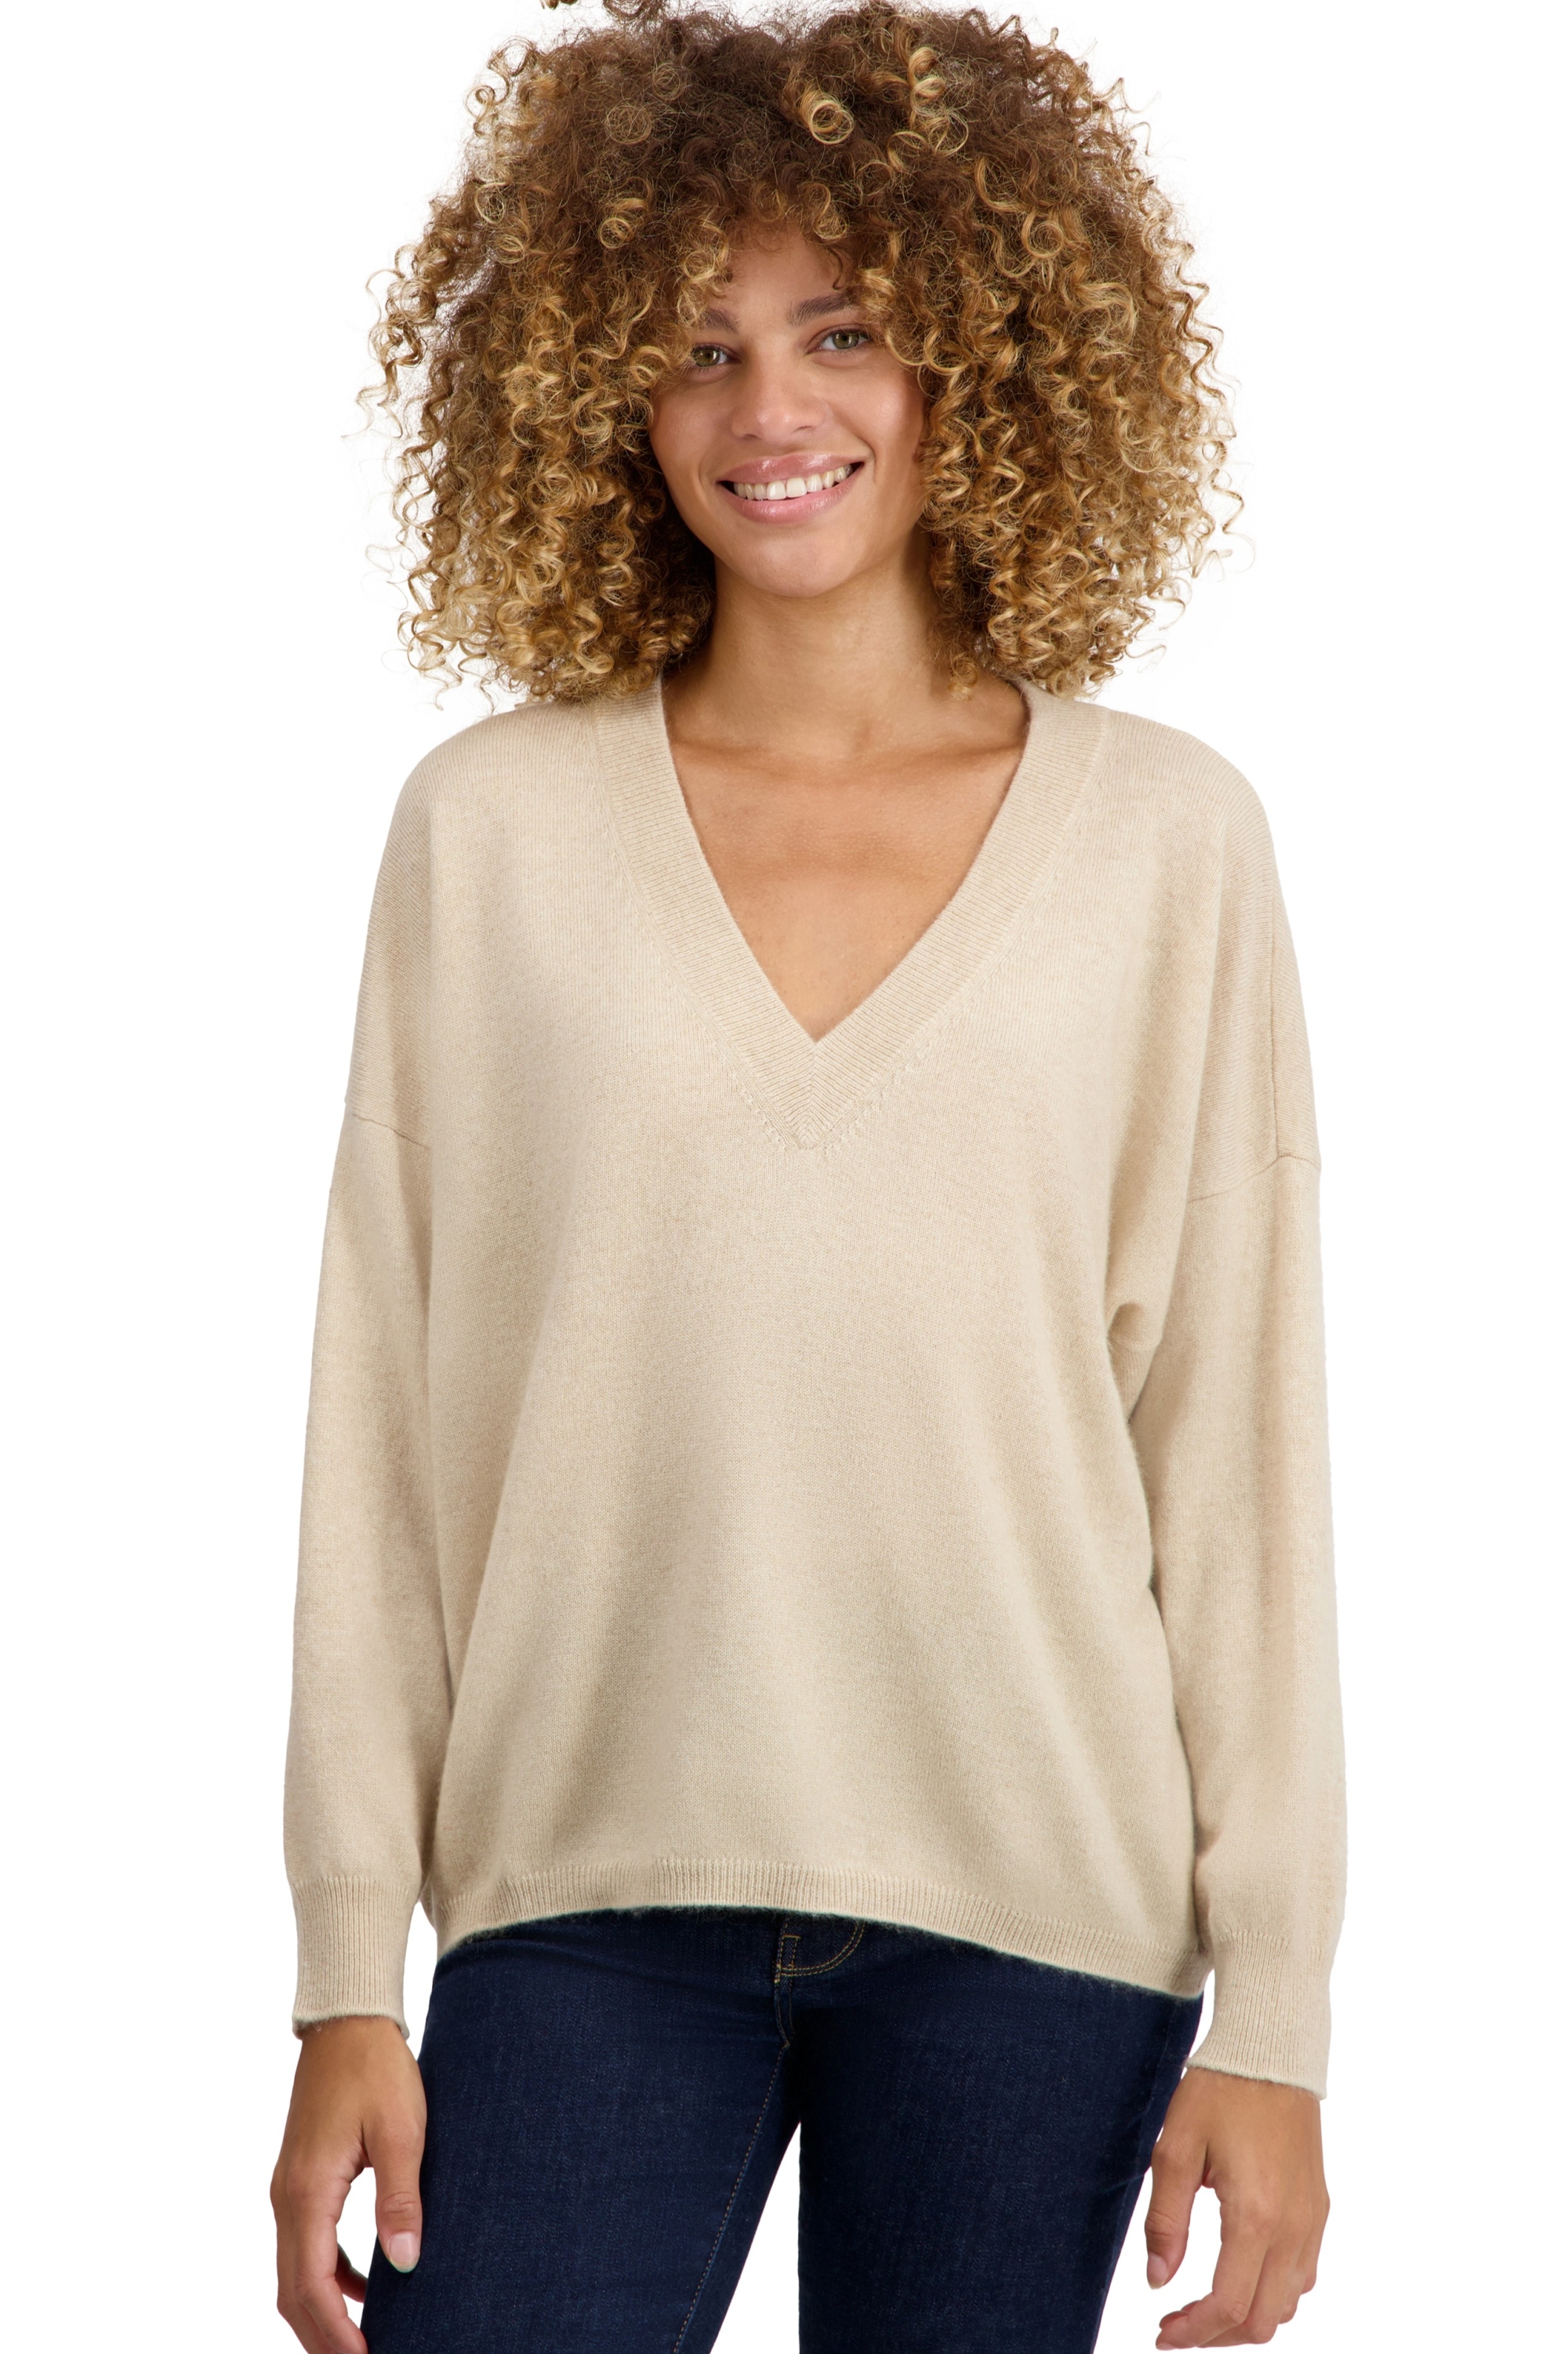 Cachemire pull femme theia natural beige l